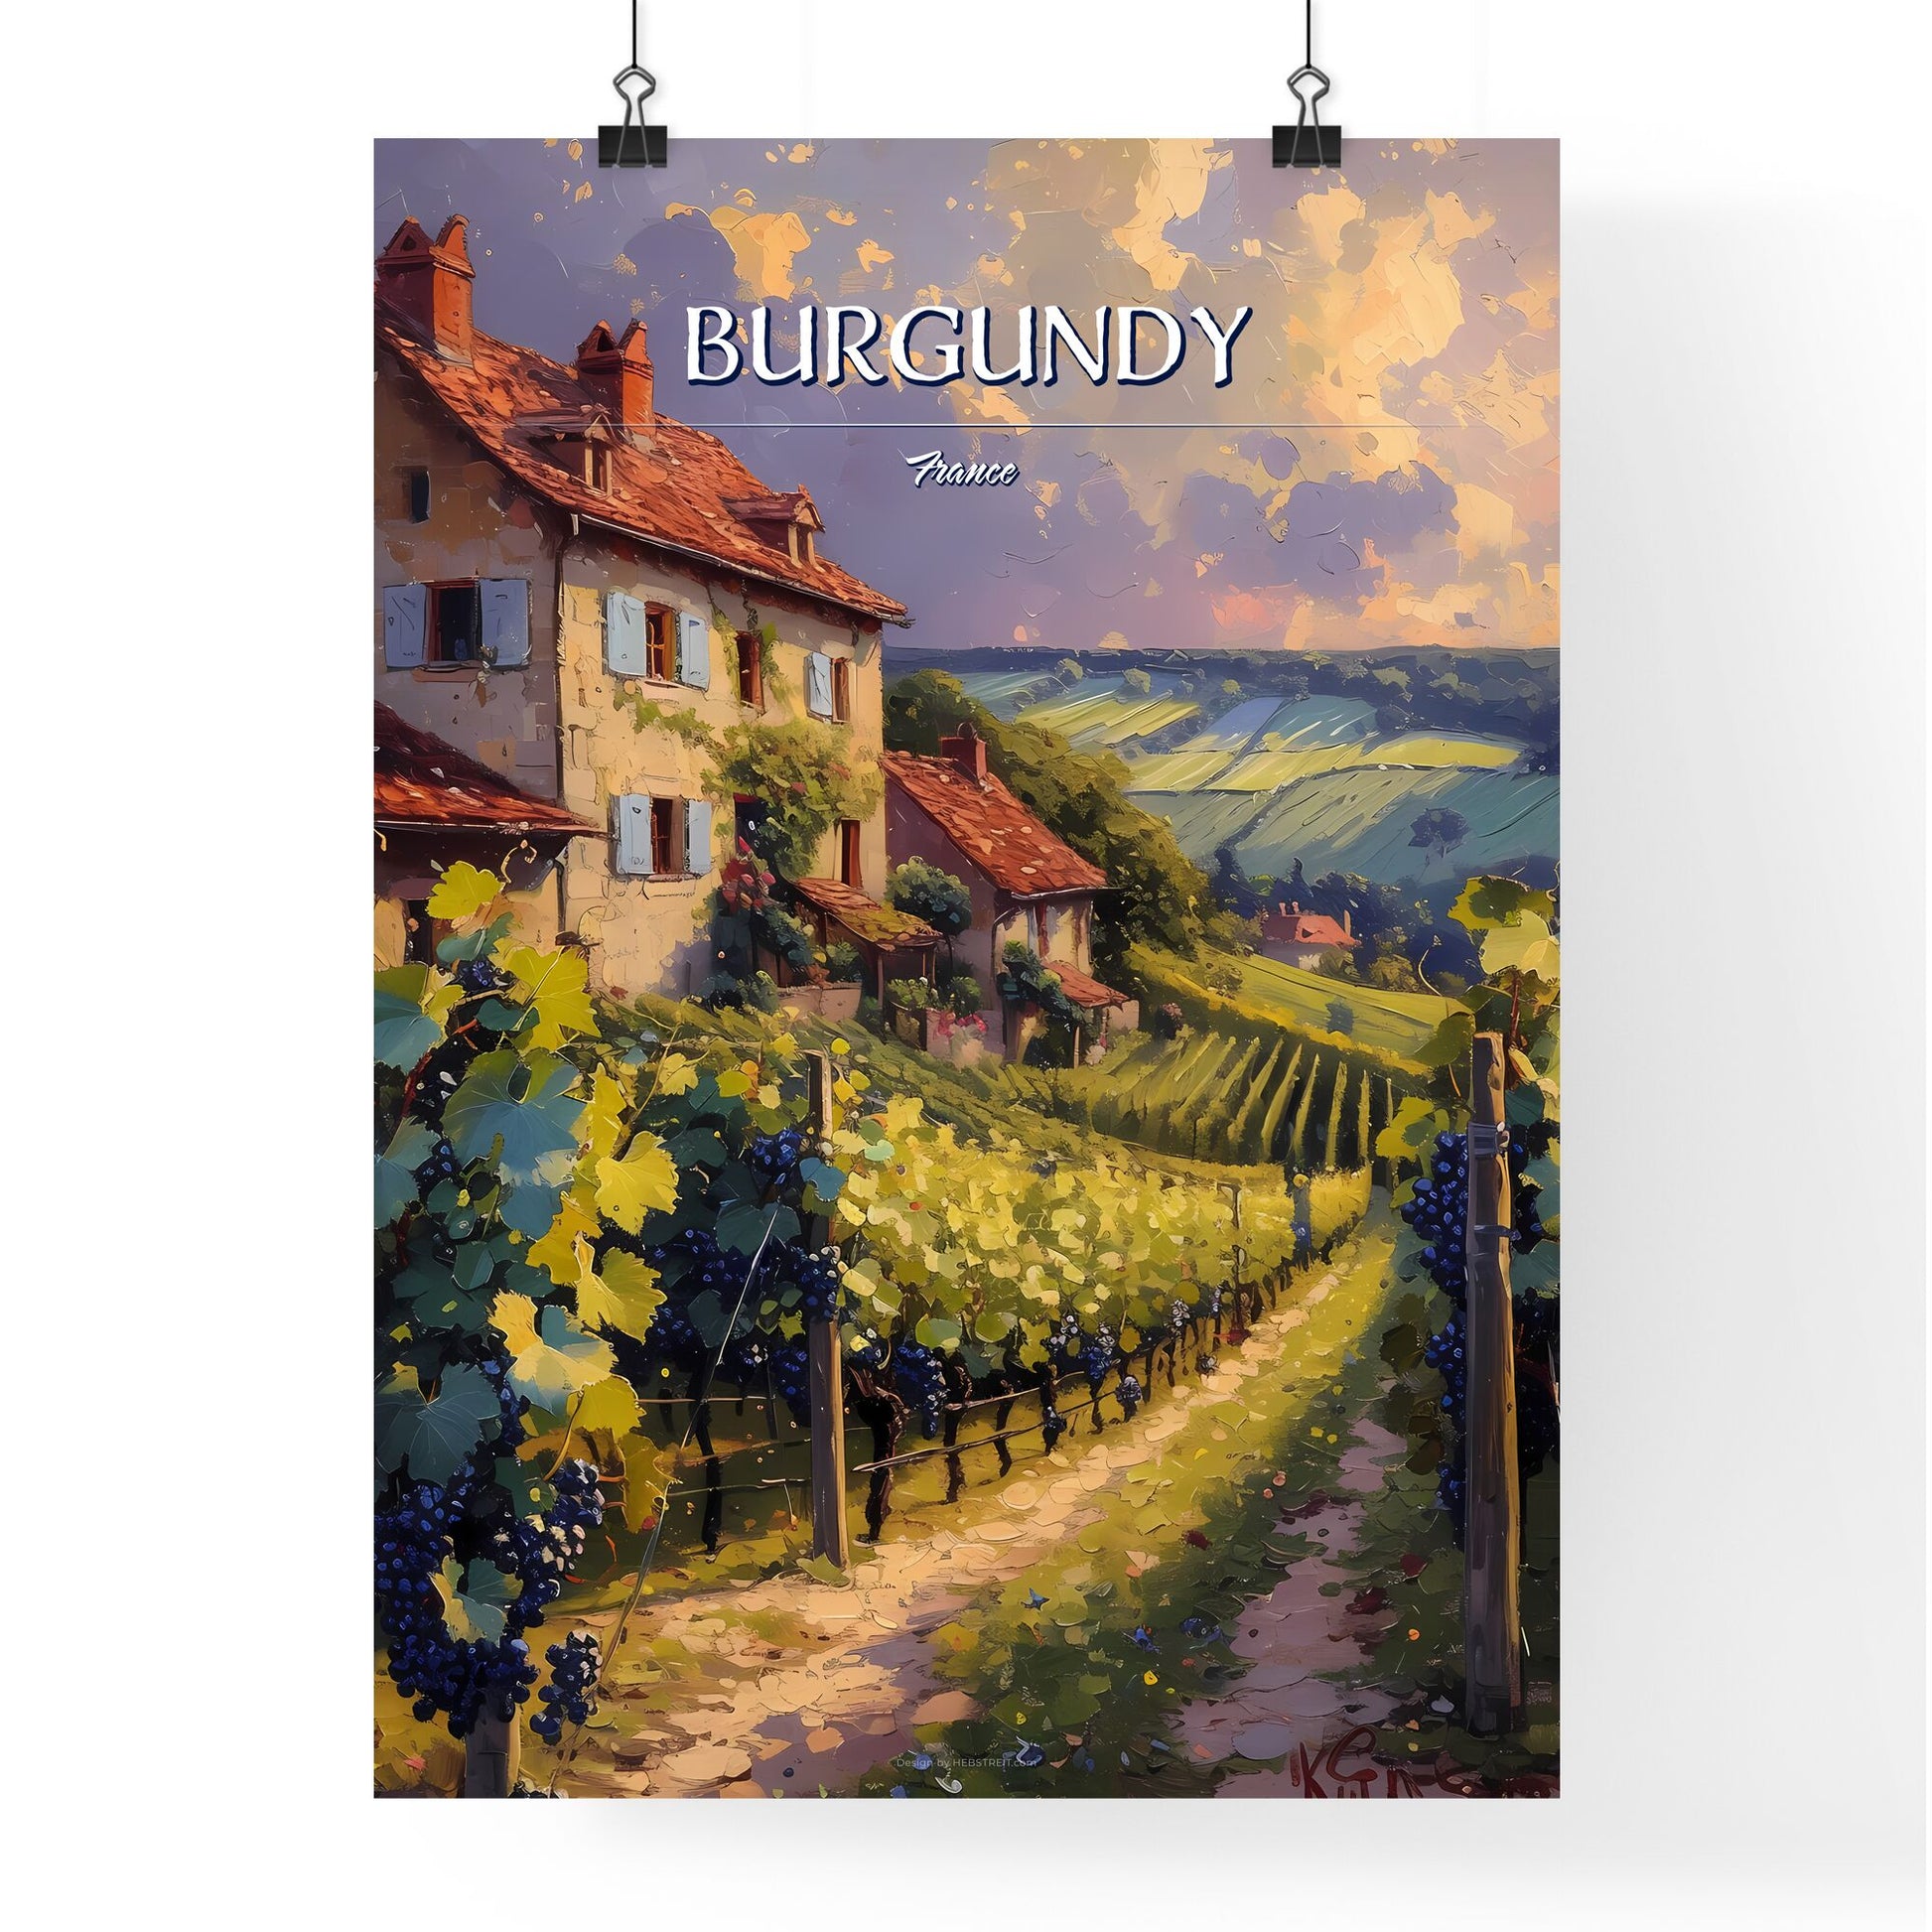 Burgundy, France - Art print of a painting of a house with a vineyard Default Title